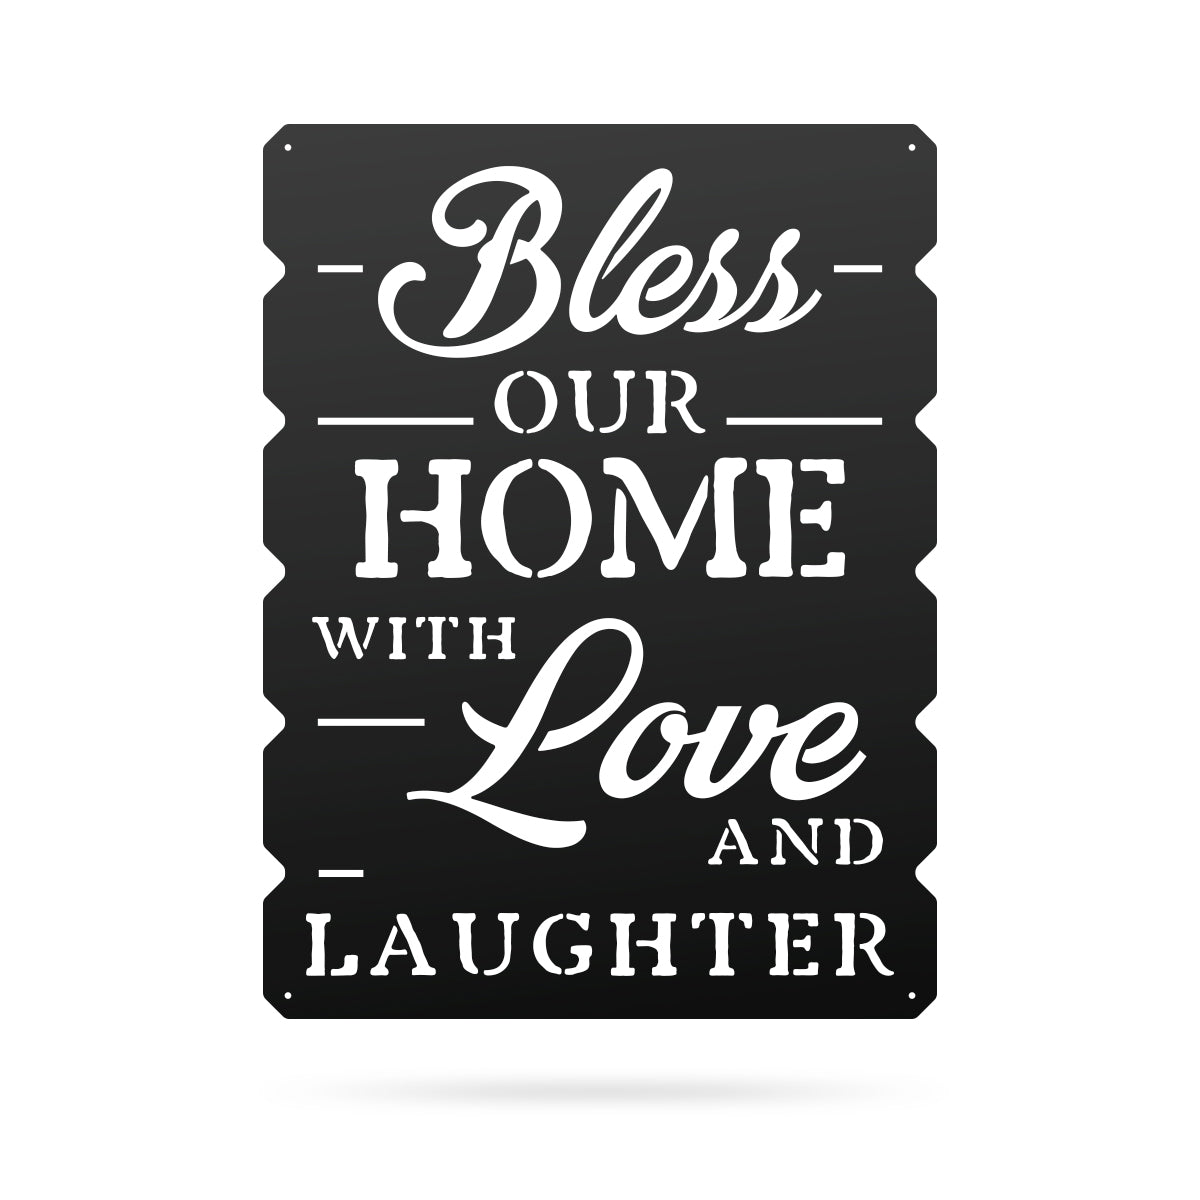 Bless Our Home Wall Art 18"x24" / Black - RealSteel Center